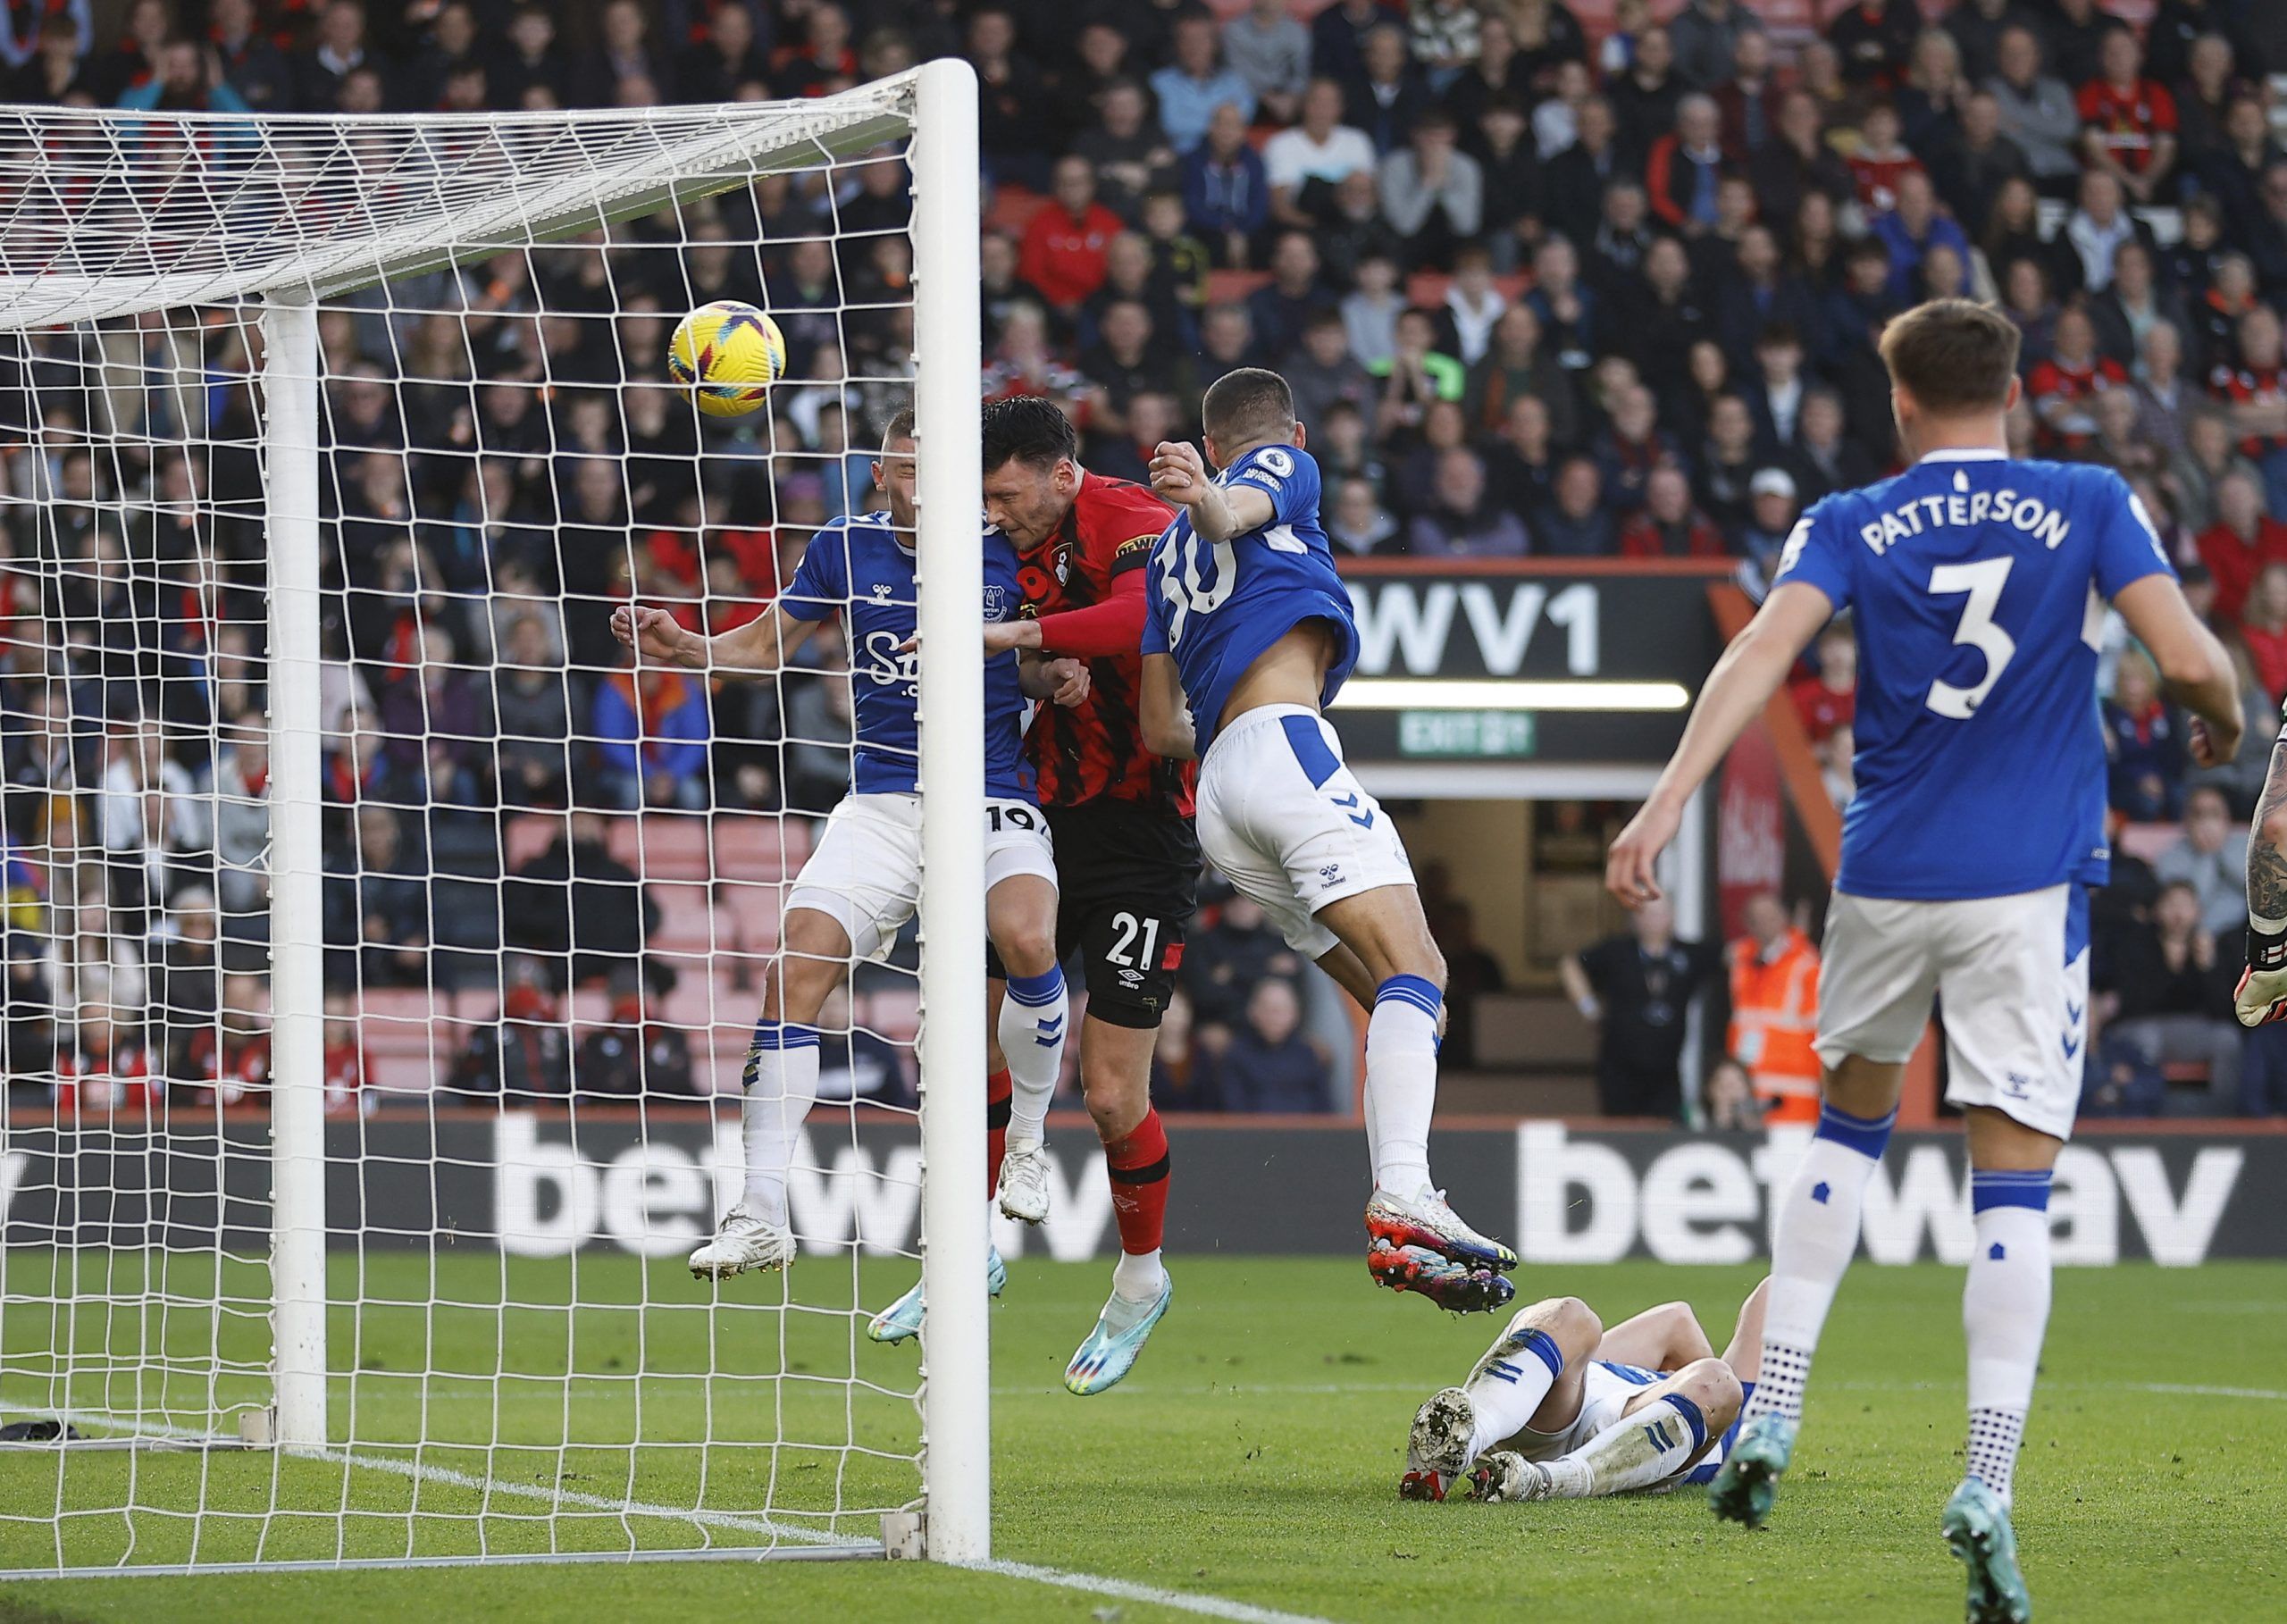 Everton: Decision to allow second Bournemouth goal an ‘absolute shambles’ -Everton News